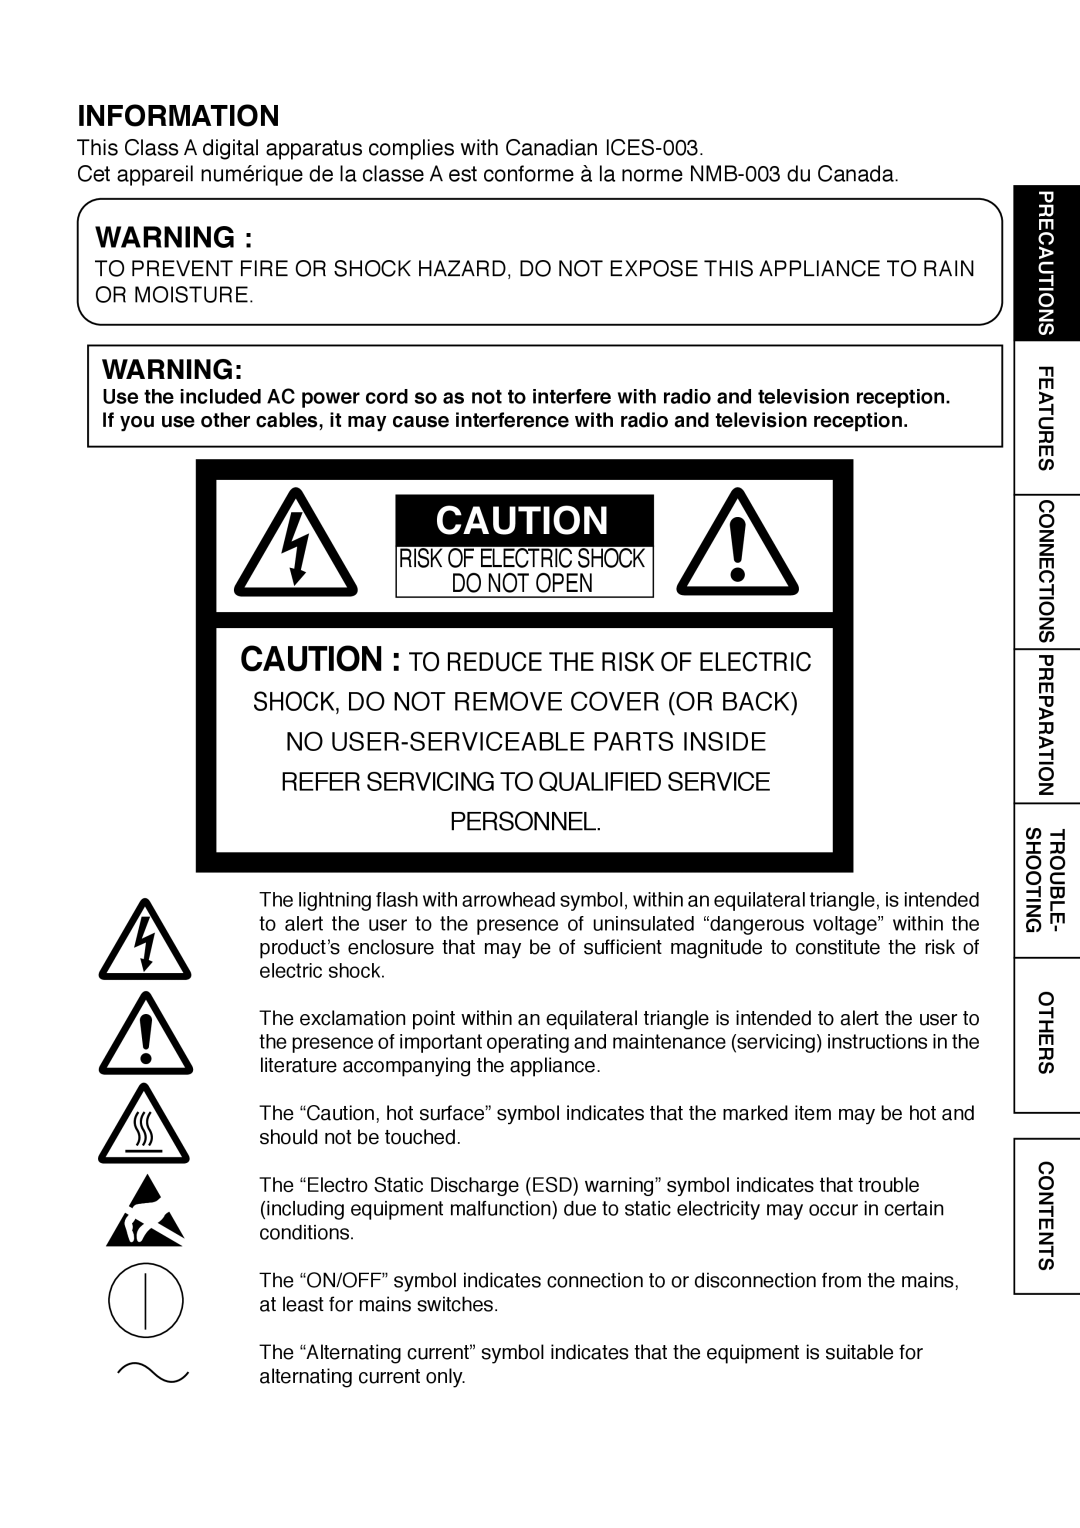 Mitsubishi Electronics CP9800DW Information, Risk Of Electric Shock Do Not Open, Caution To Reduce The Risk Of Electric 